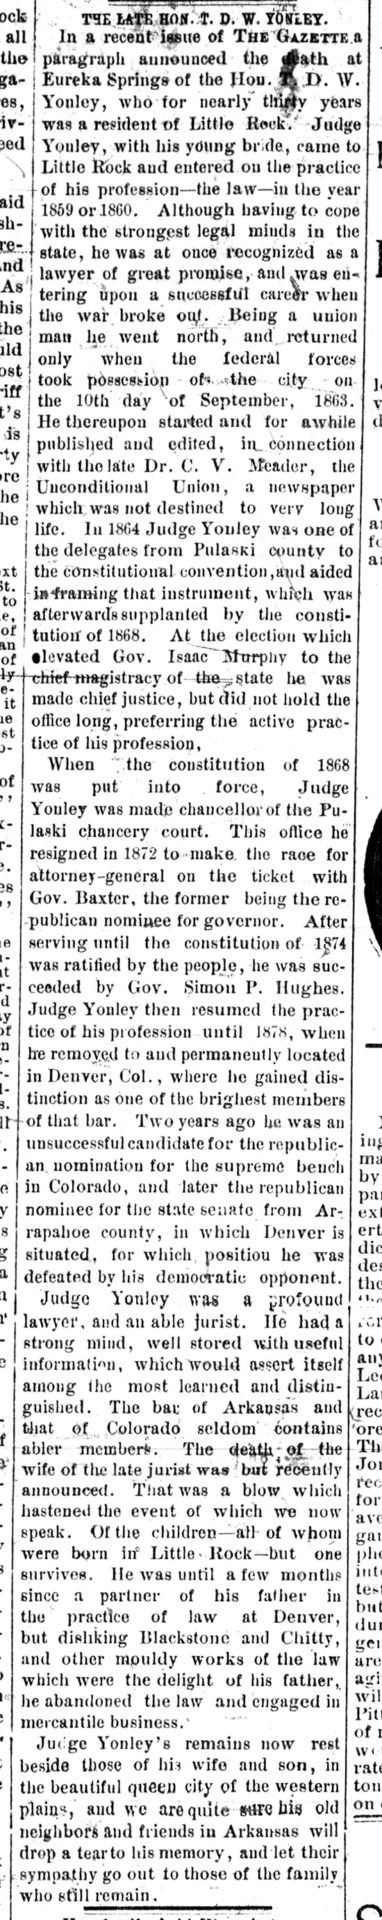 "The Late Honorable T. D. W. Yonley" newspaper clipping